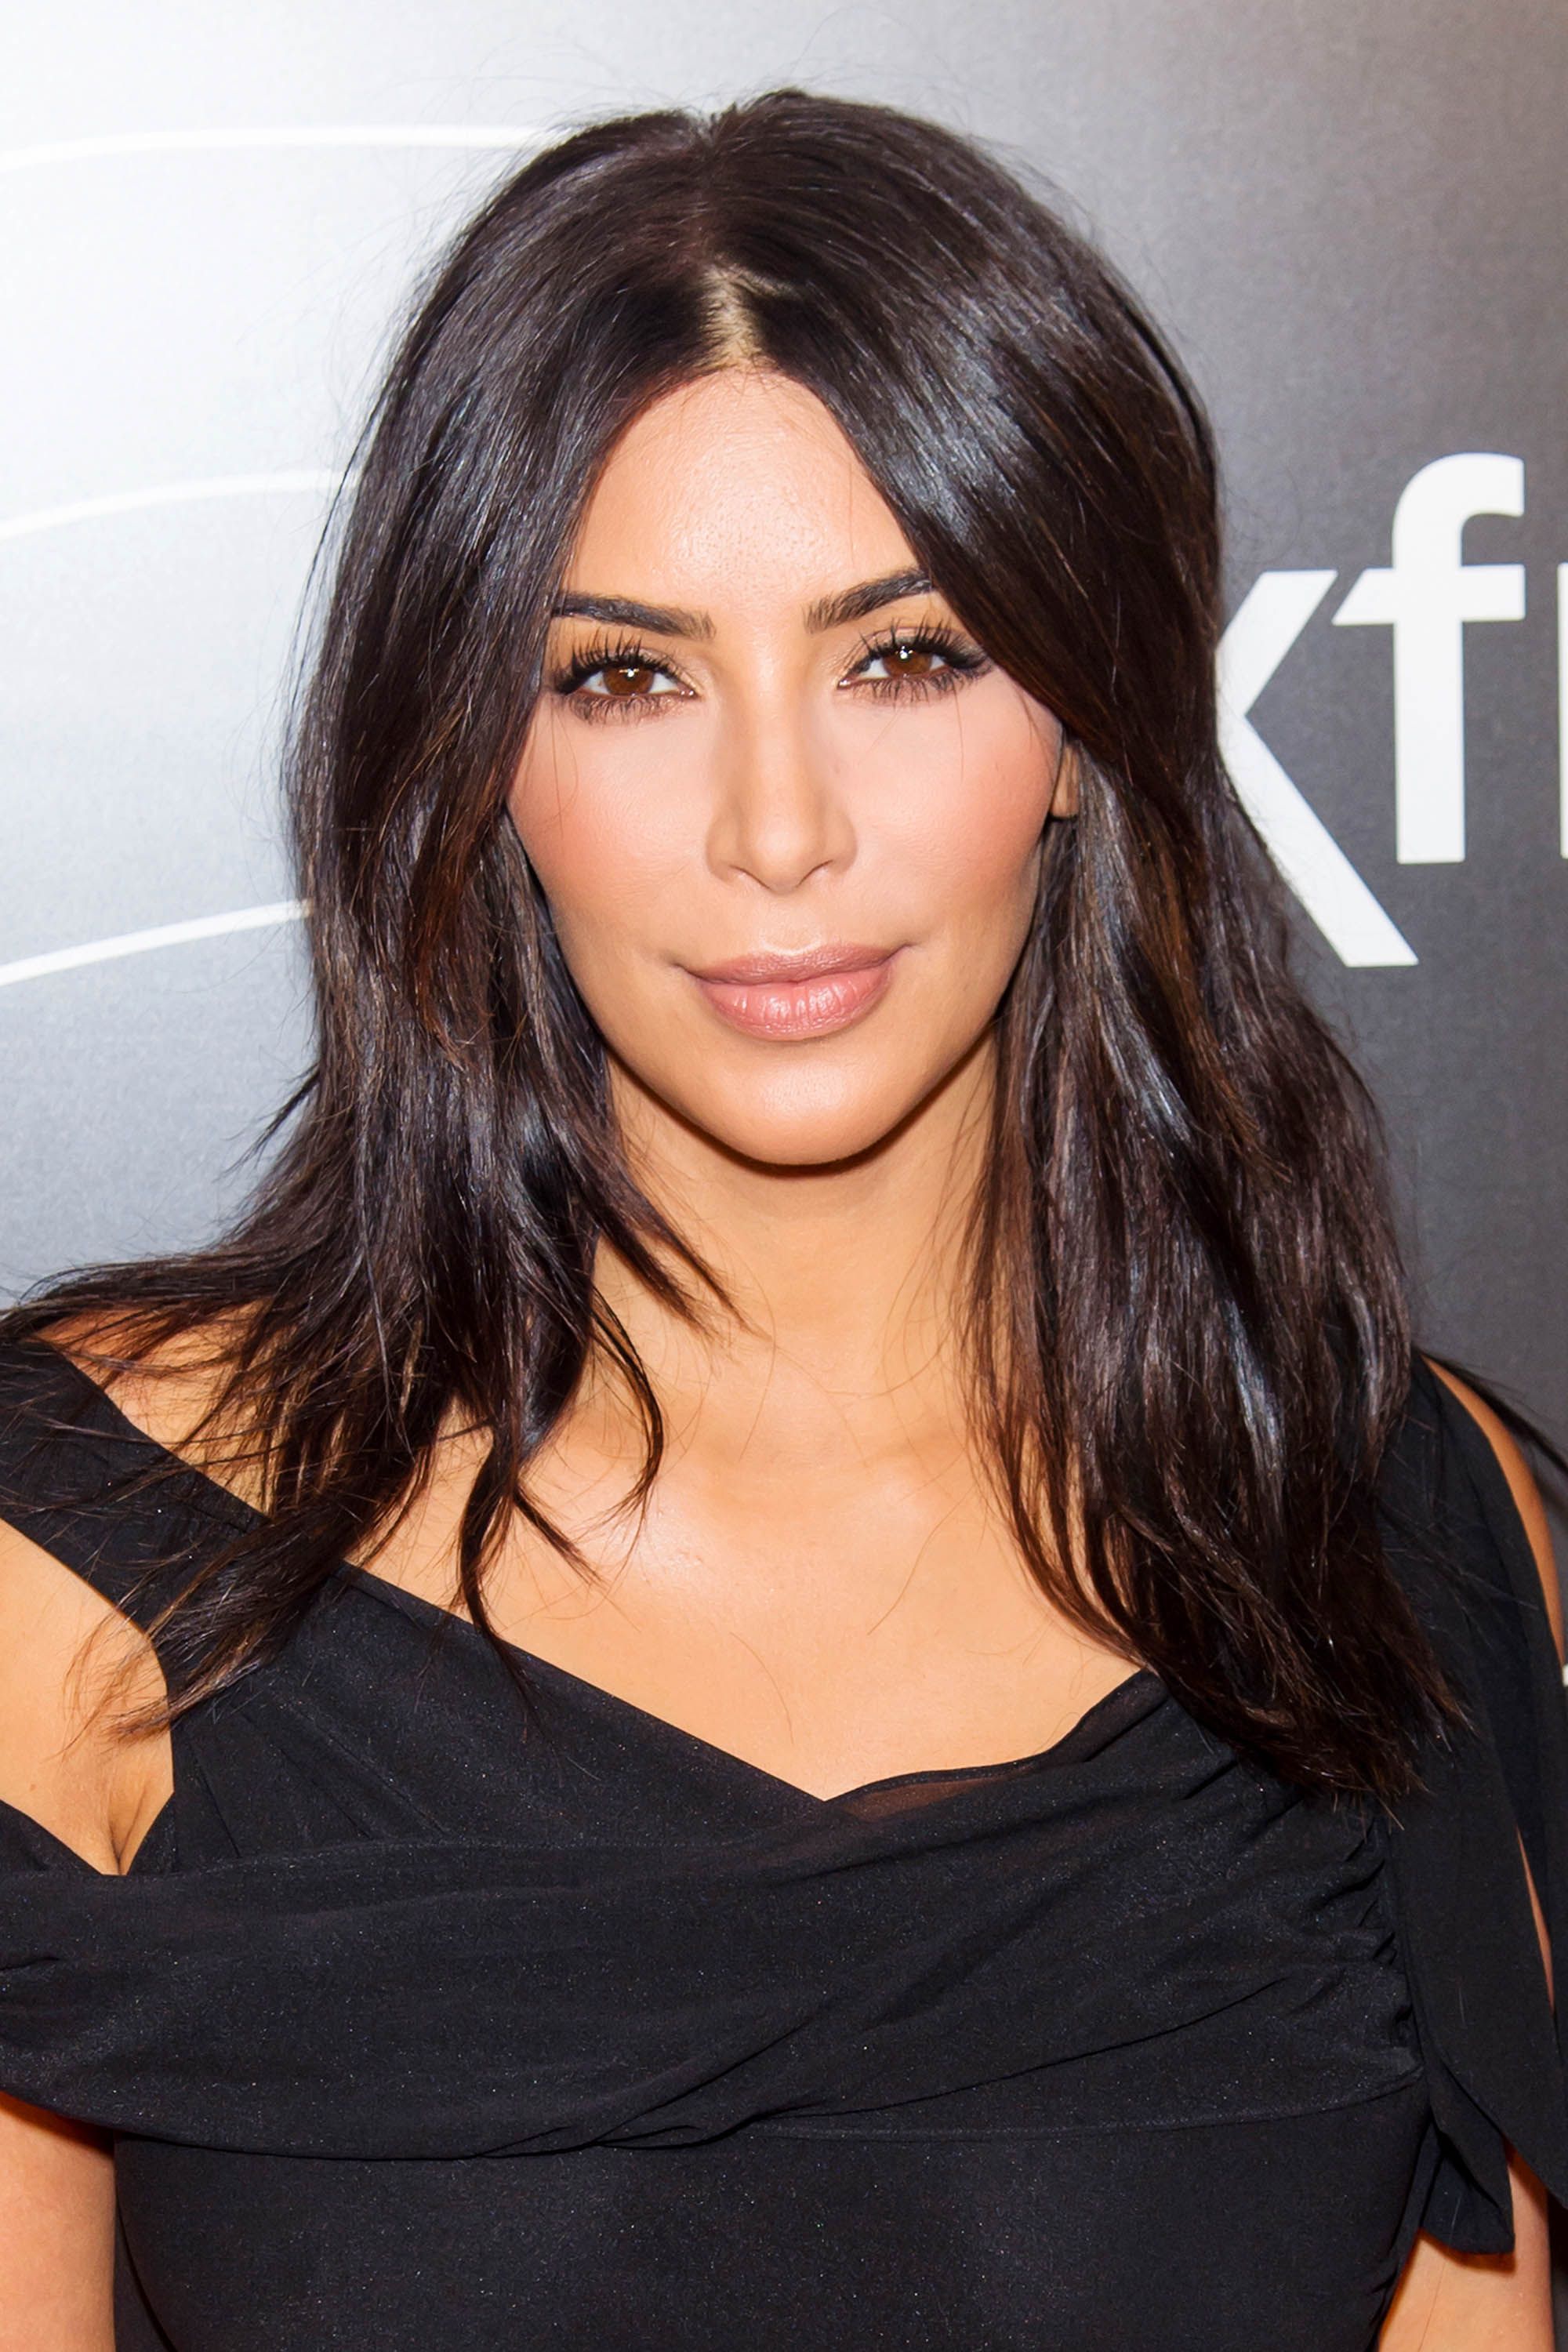 How Kim Kardashian's Hair and Makeup Have Changed Over the Years